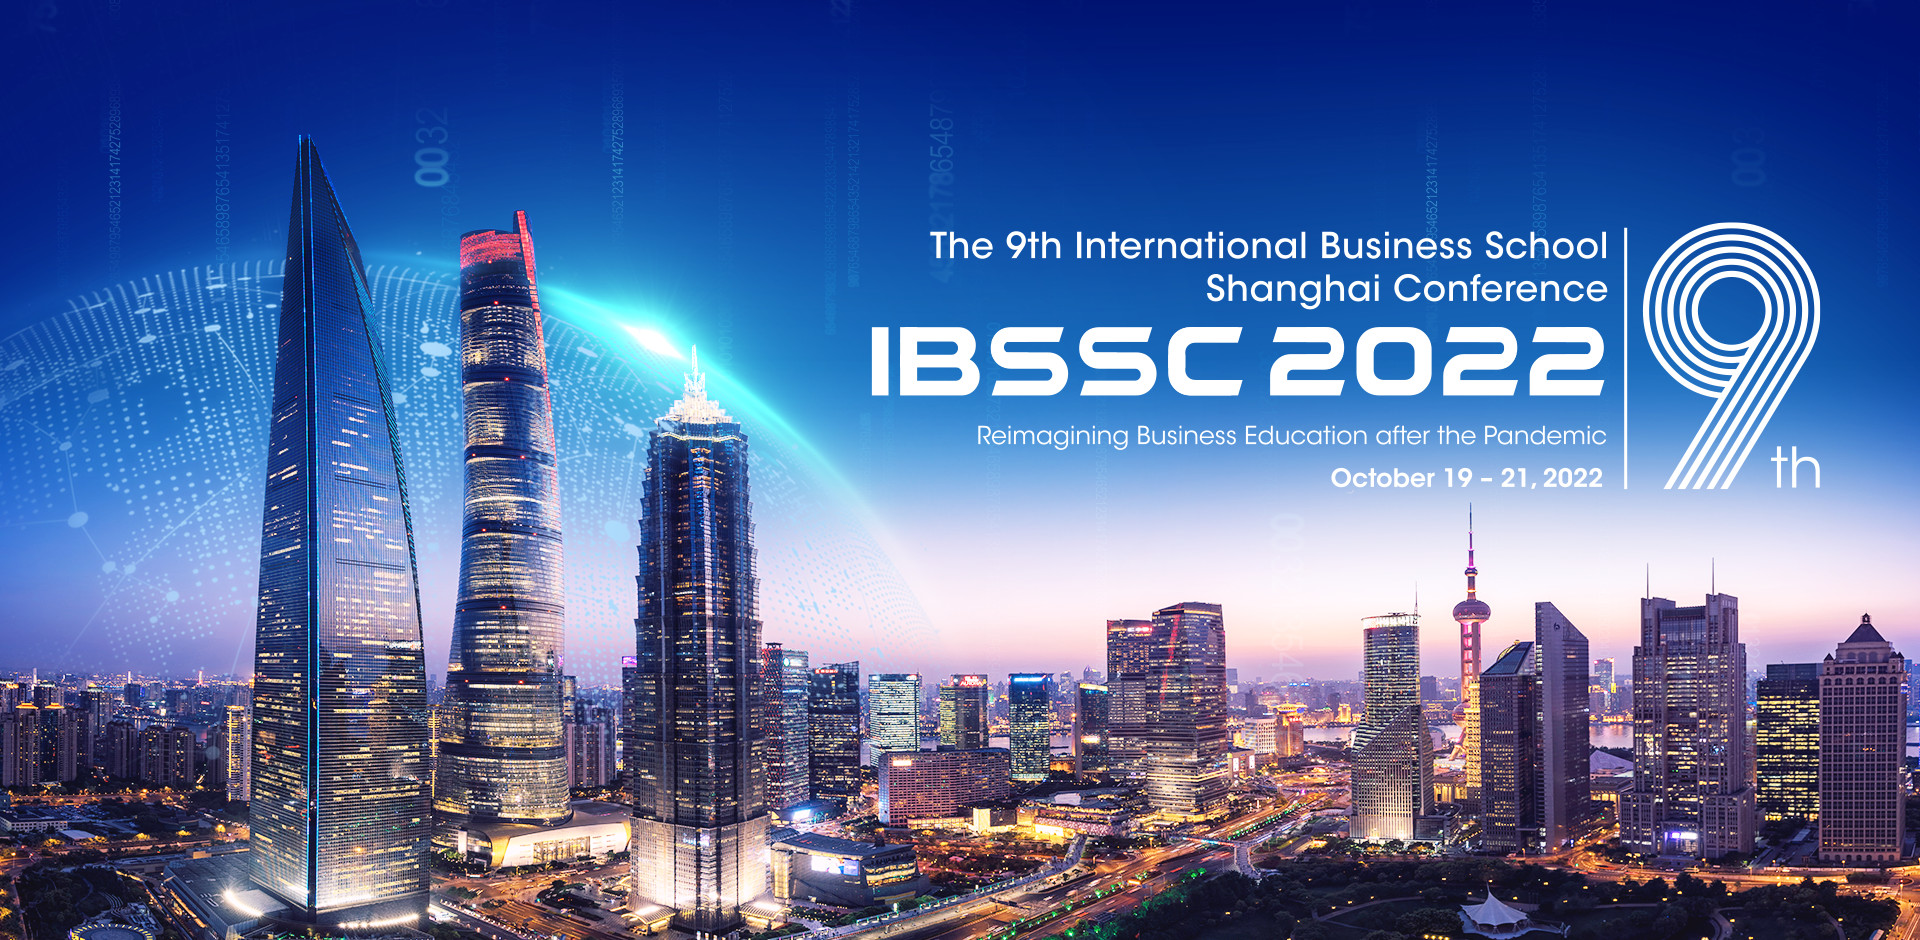 The 9th International Business School Shanghai Conference